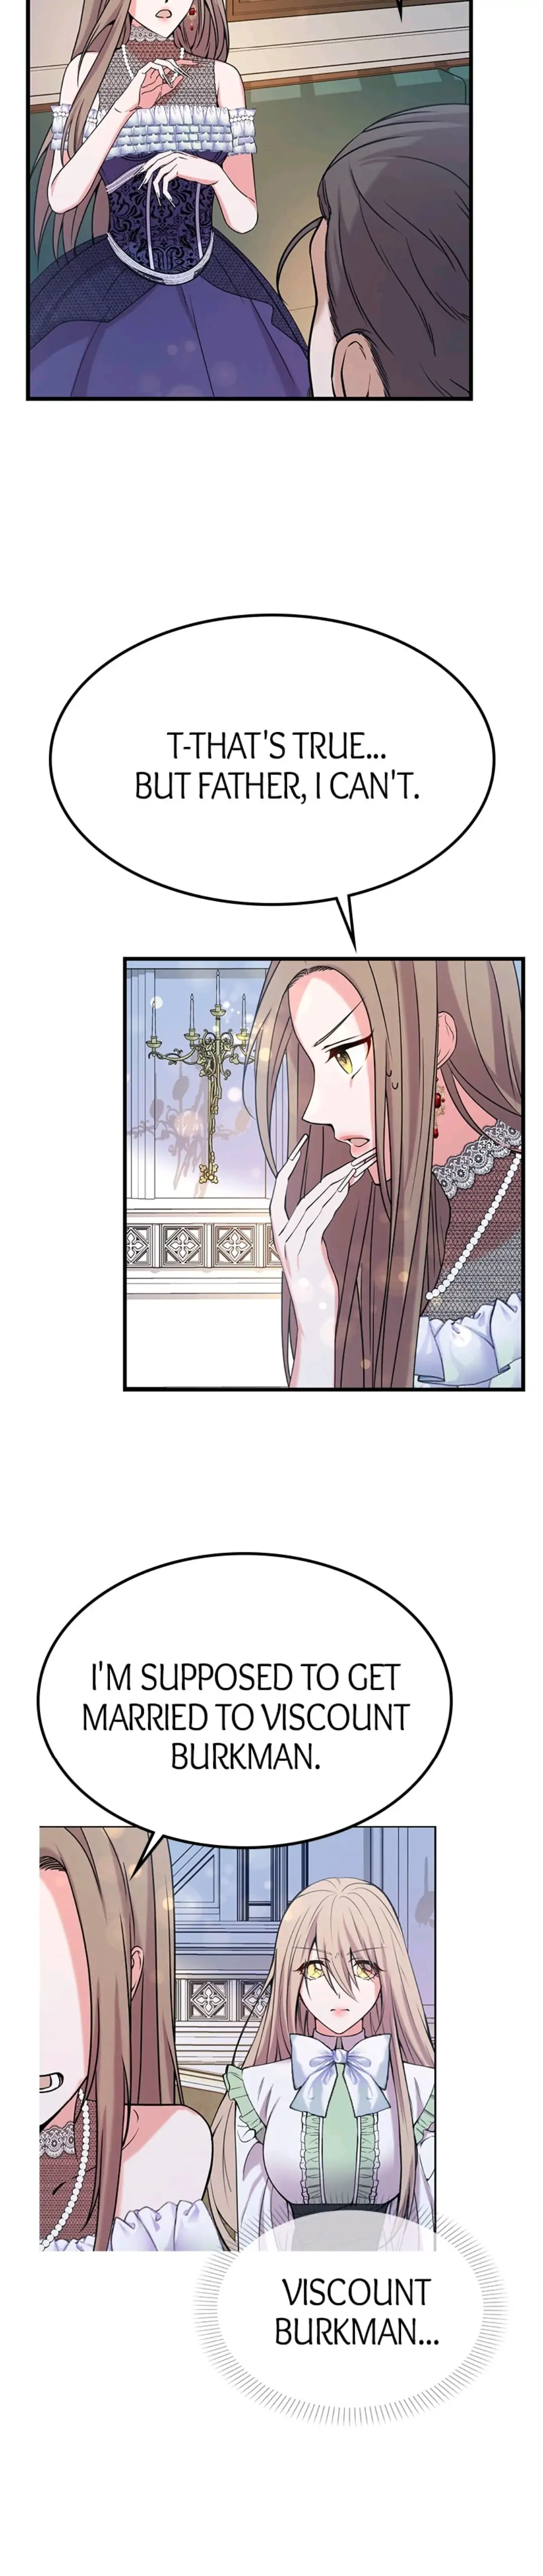 Amelia’s Contract Marriage chapter 2